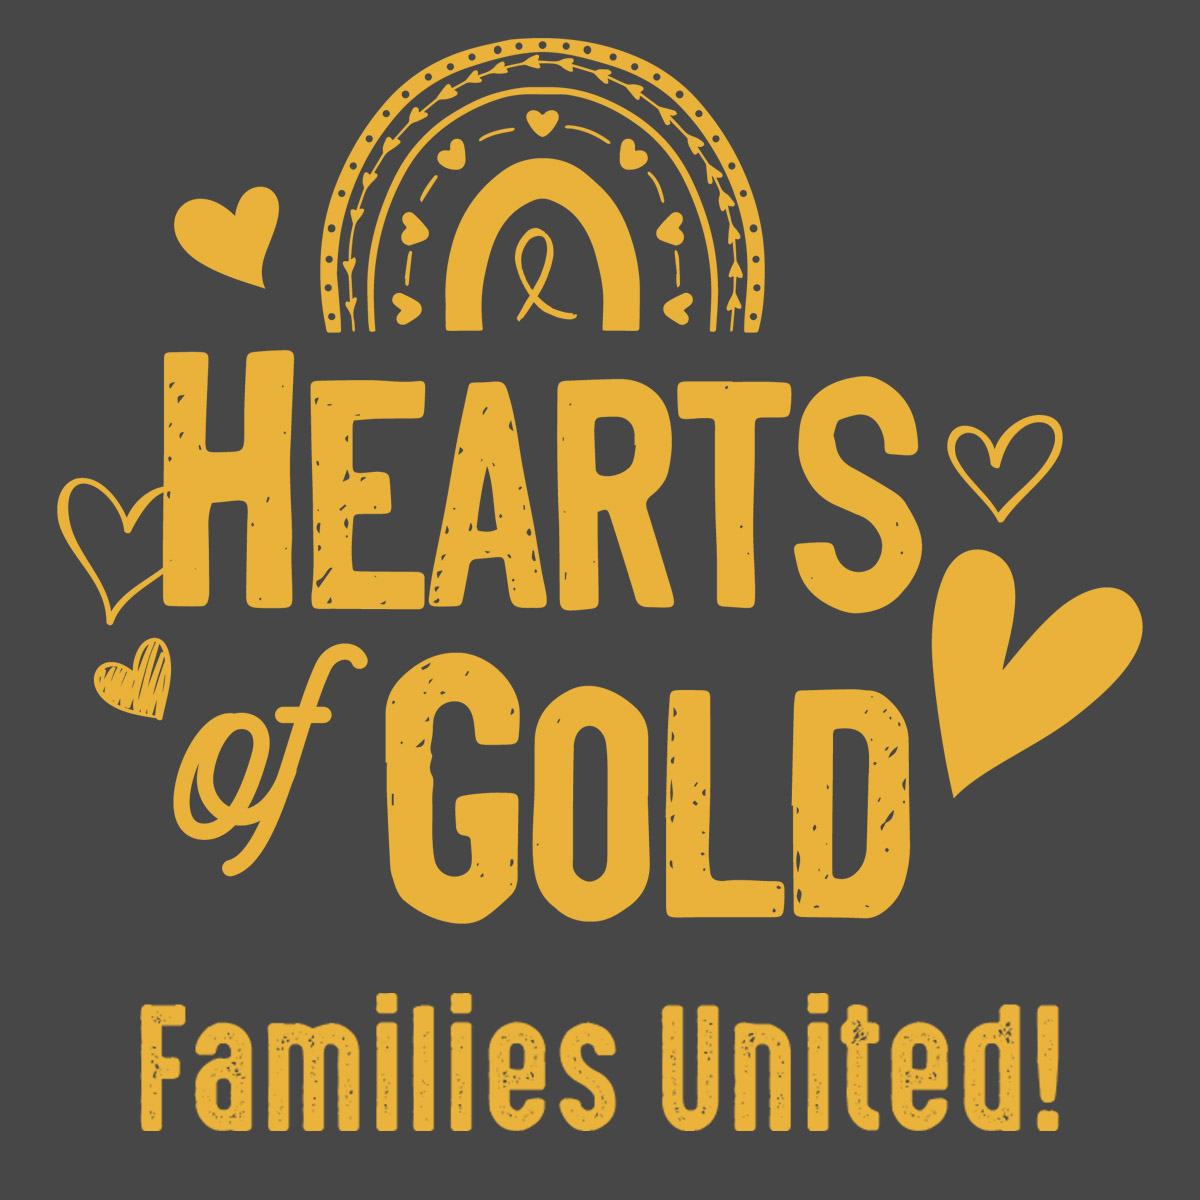 Hearts of Gold: Families United!